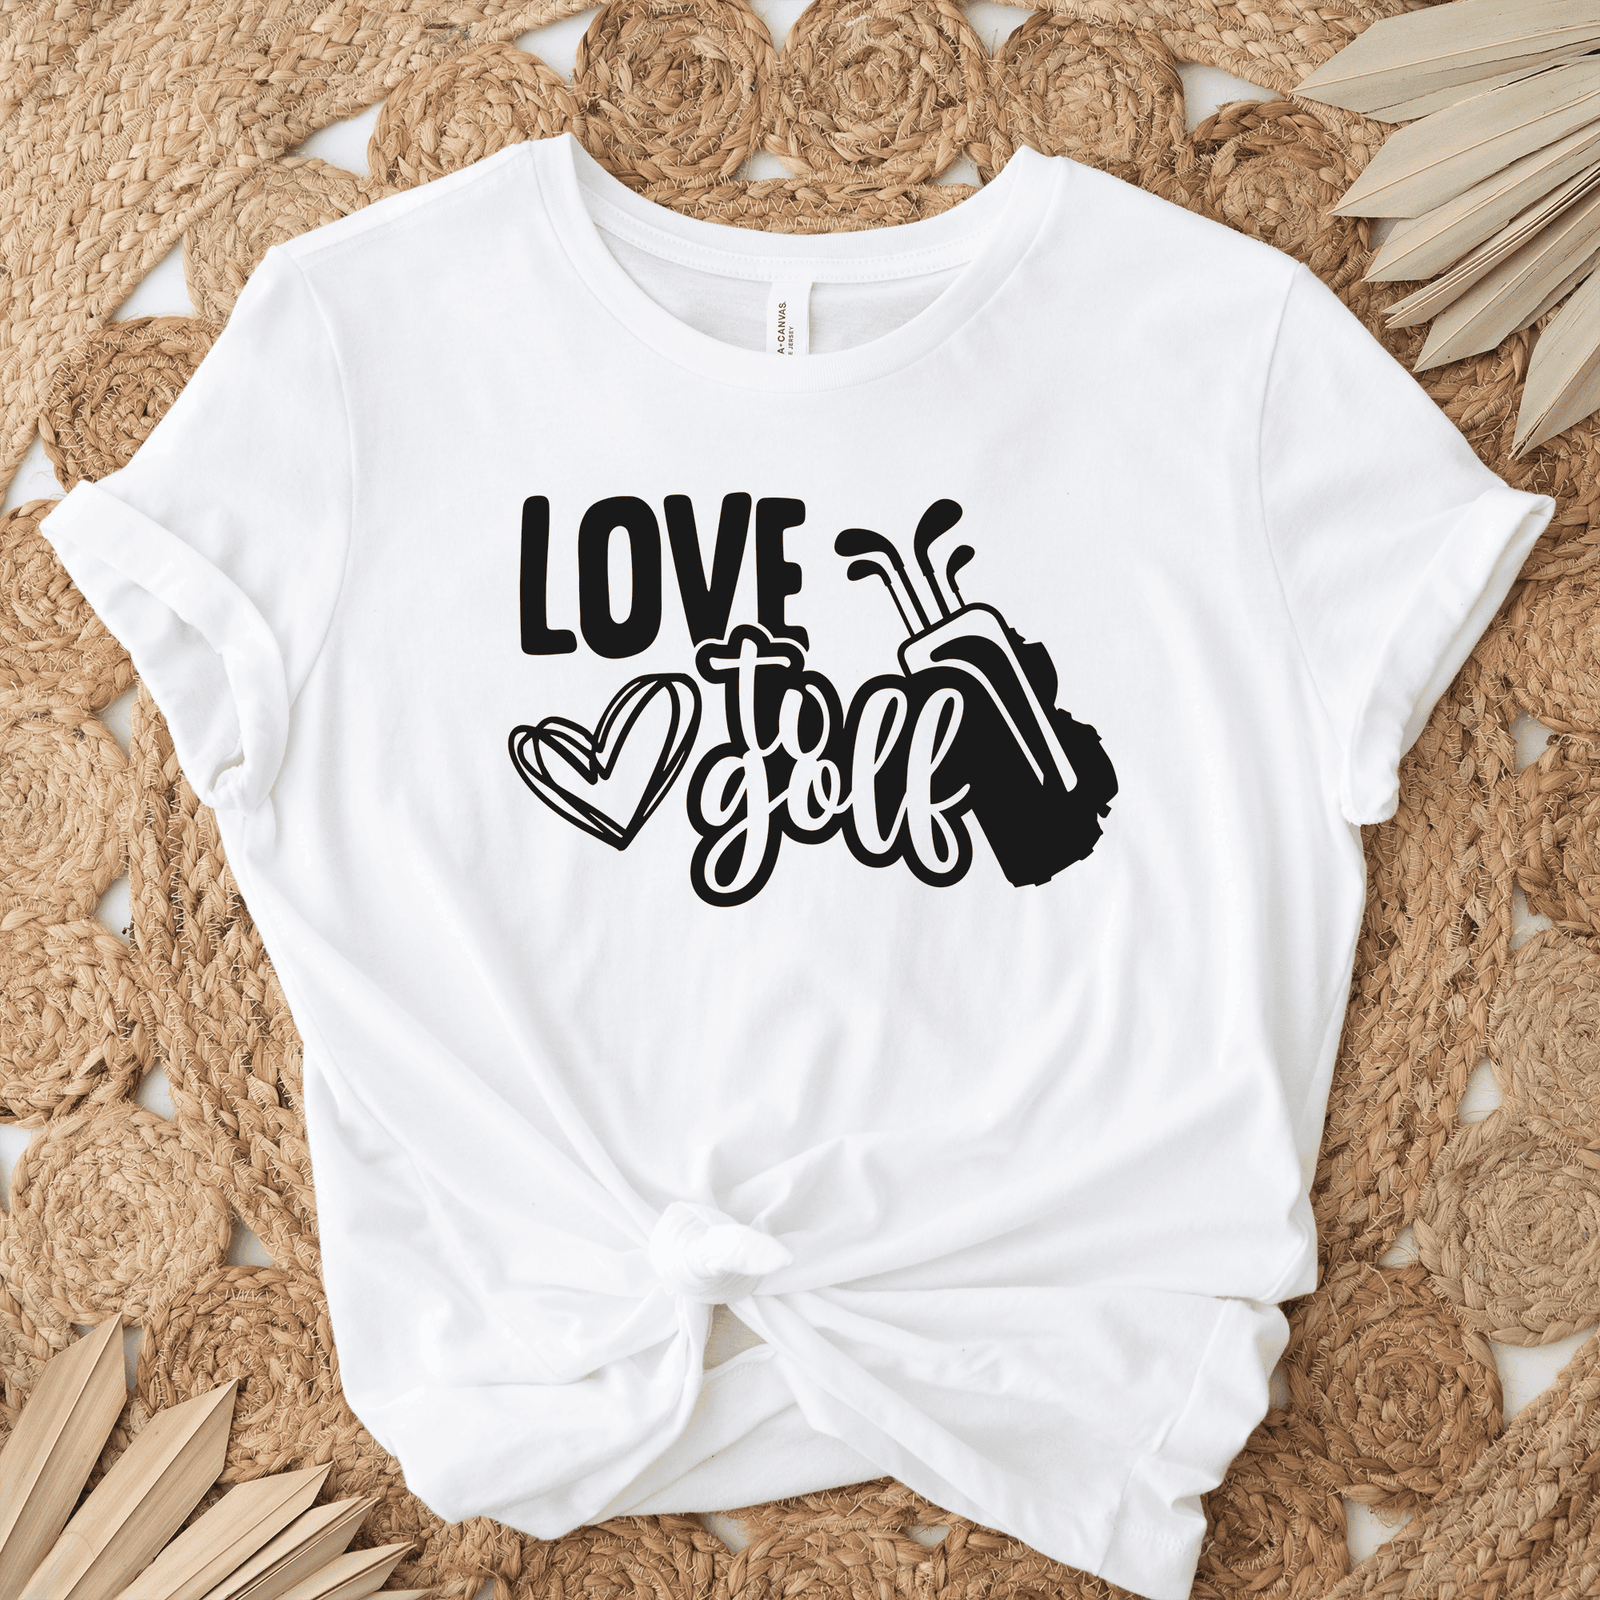 Womens White T Shirt with Loving-To-Golf design